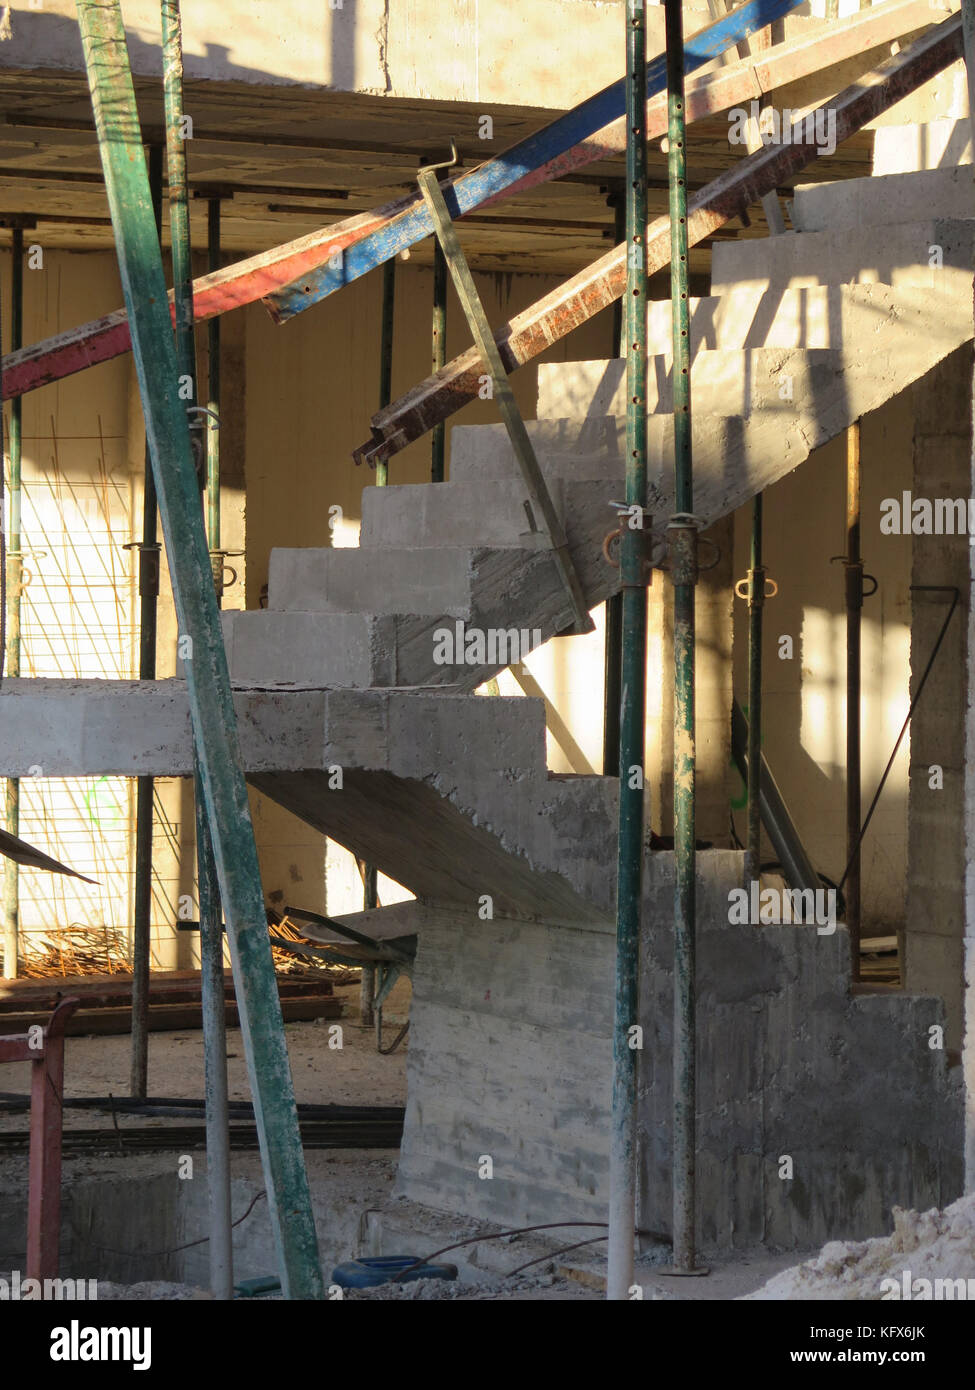 Concrete staircase inside new building being constructed Stock Photo